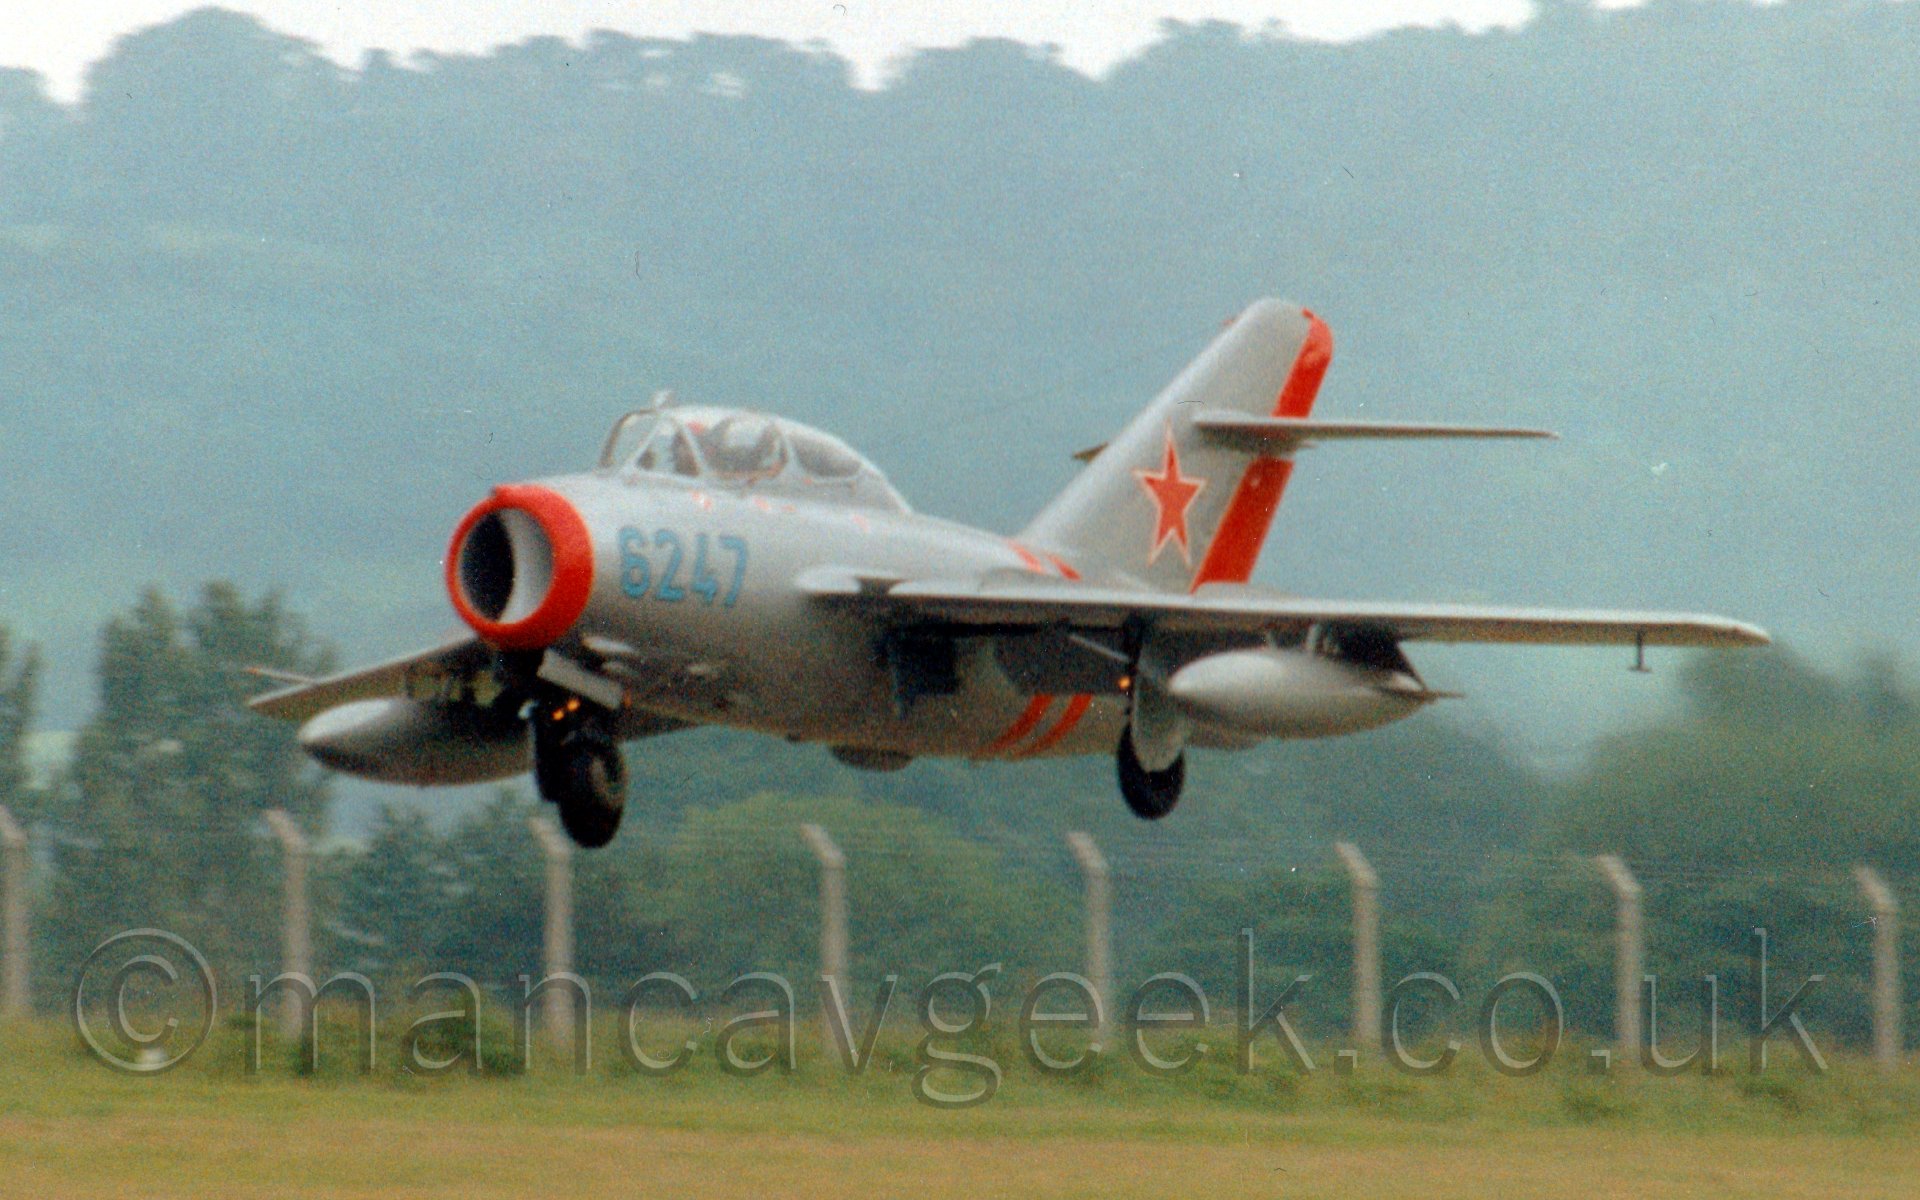 Side view of a silver and red, single engined jet fighter, flying from left to right at a very low altitude, with undercarriage extended and flaps deployed from the rear of the wings, suggesting it is coming in to land, with trees and bushes vanishing into hazy grey sky in the background.